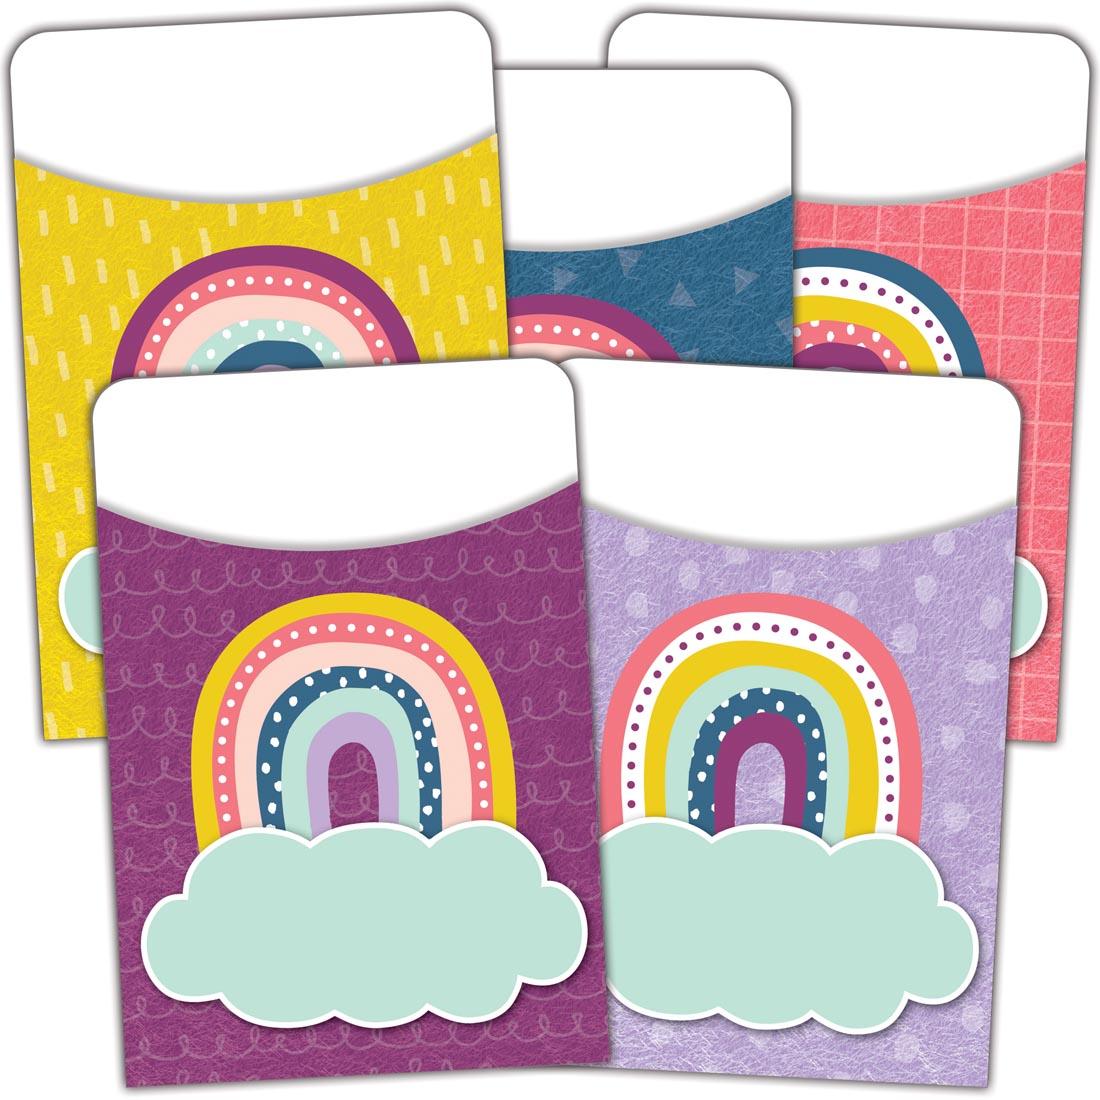 Library Pockets from the Oh Happy Day collection by Teacher Created Resources